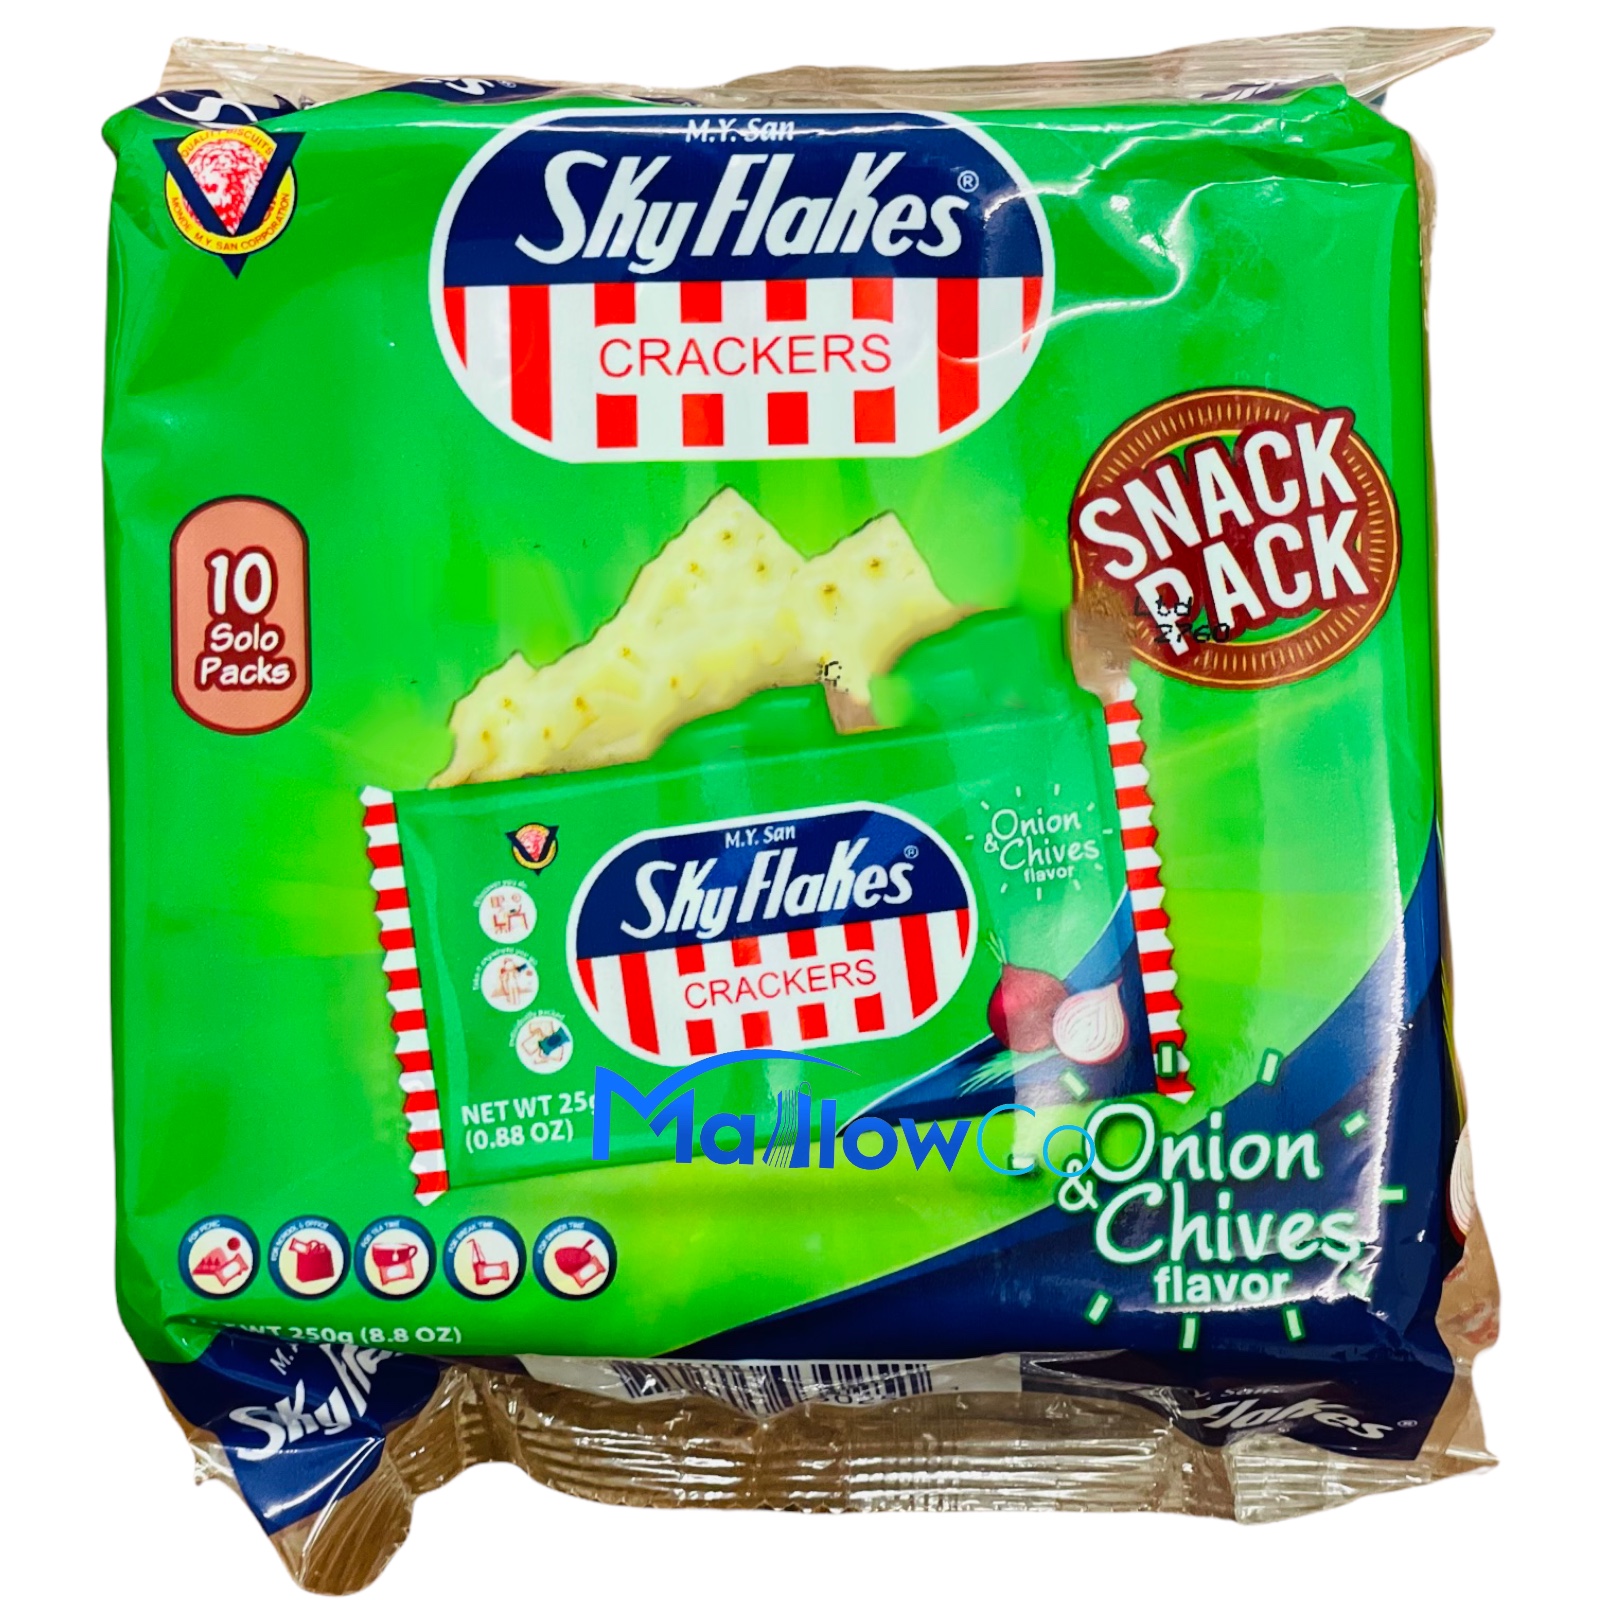 M.Y Sky Flakes Onion and Chives Cracker